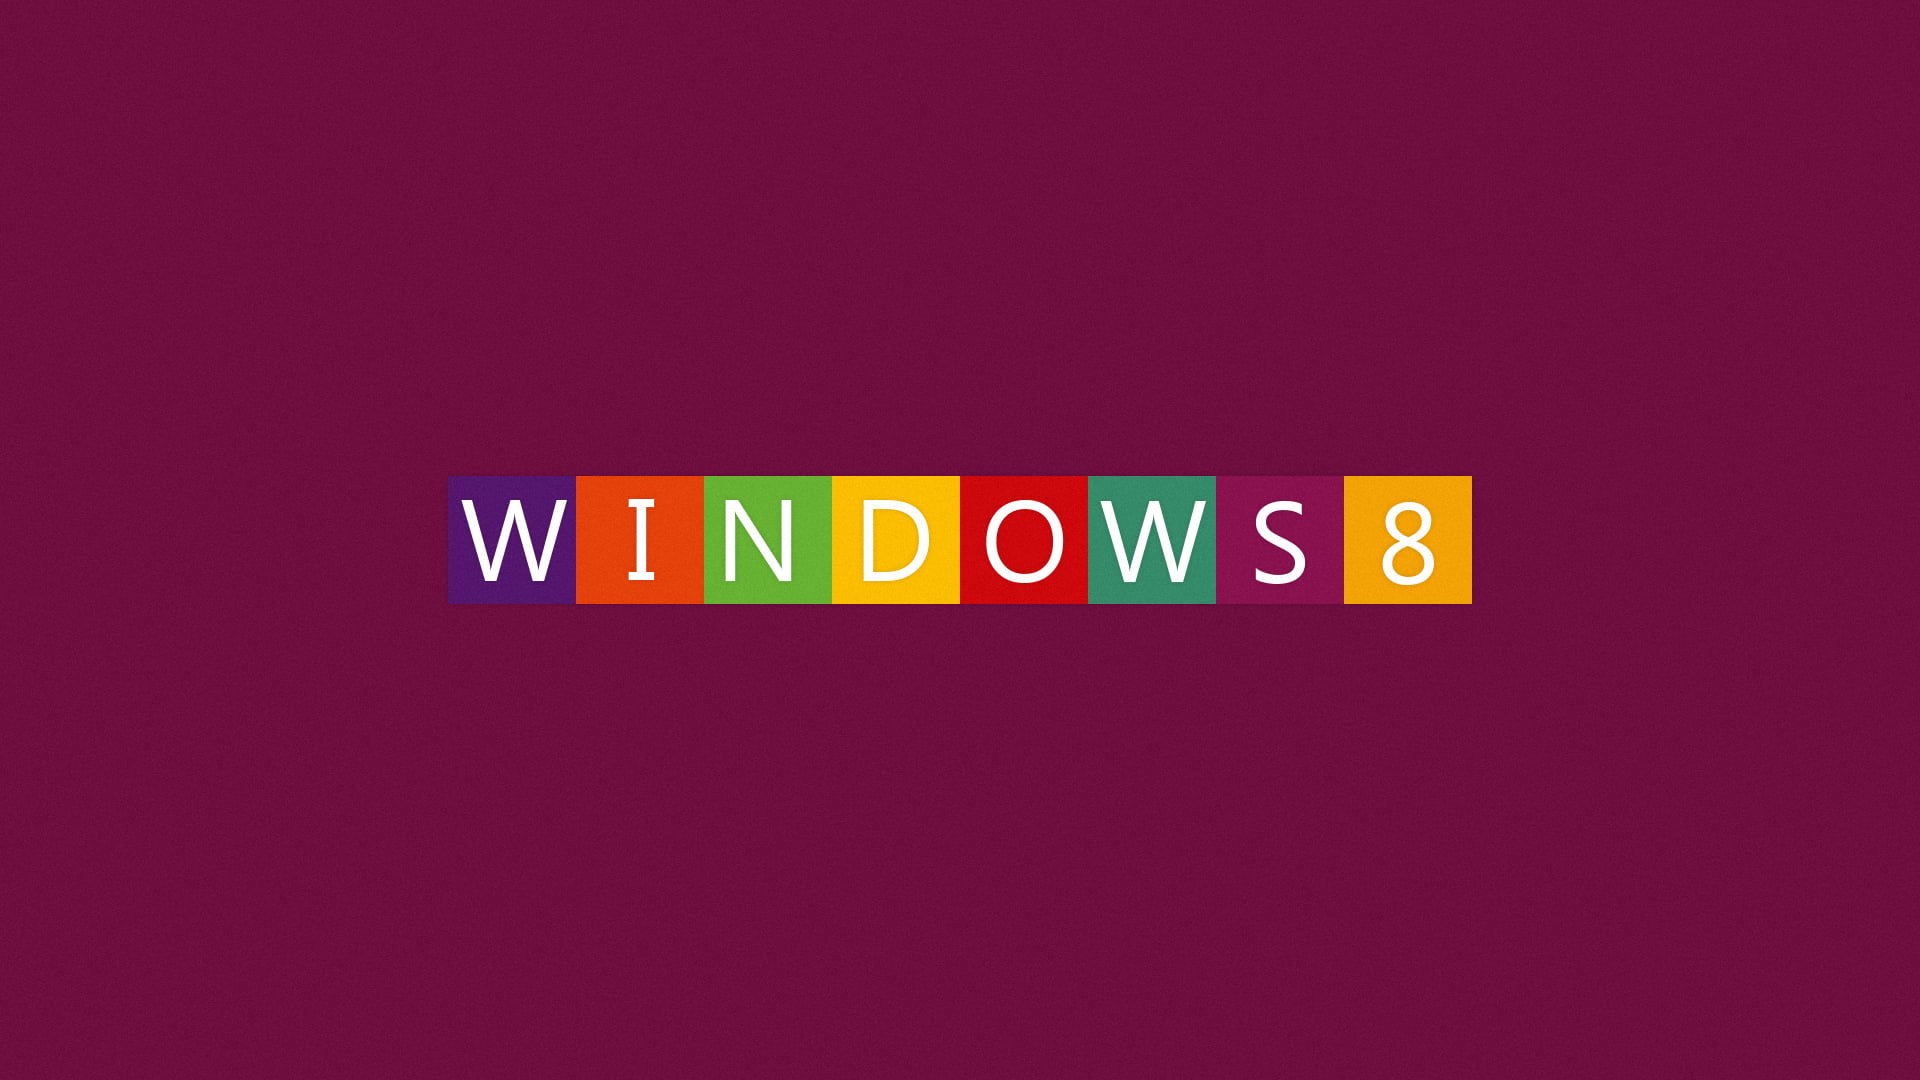 maroon background with Windows 8 text overlay, operating system